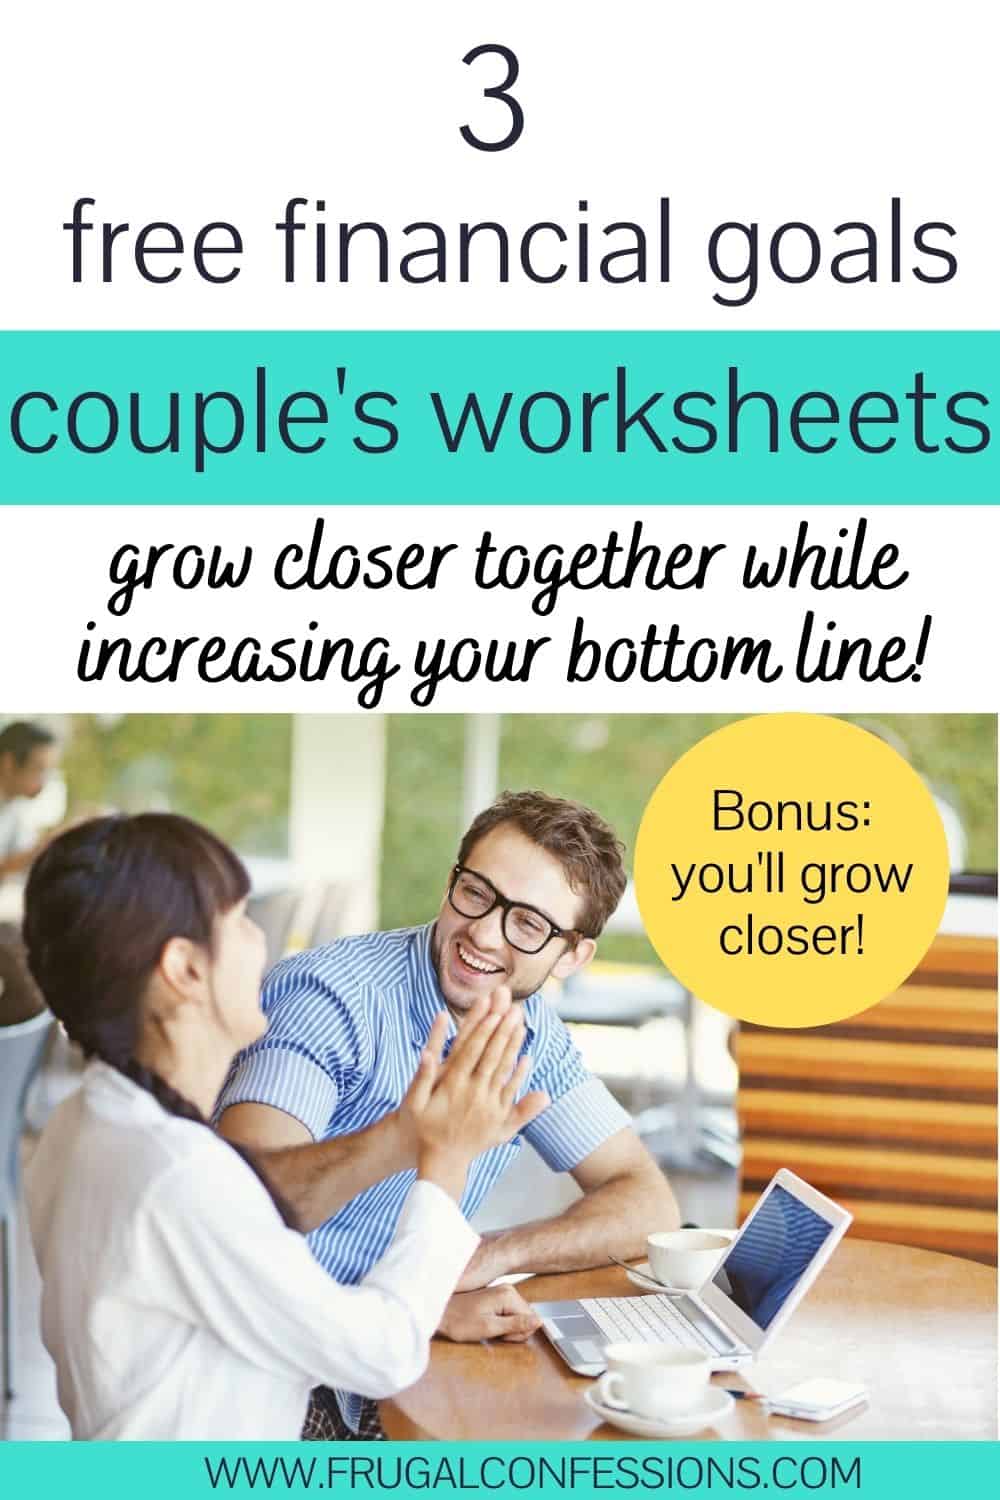 couple high-fiving each other at table outside, text overlay "3 free financial goals couple's worksheets"